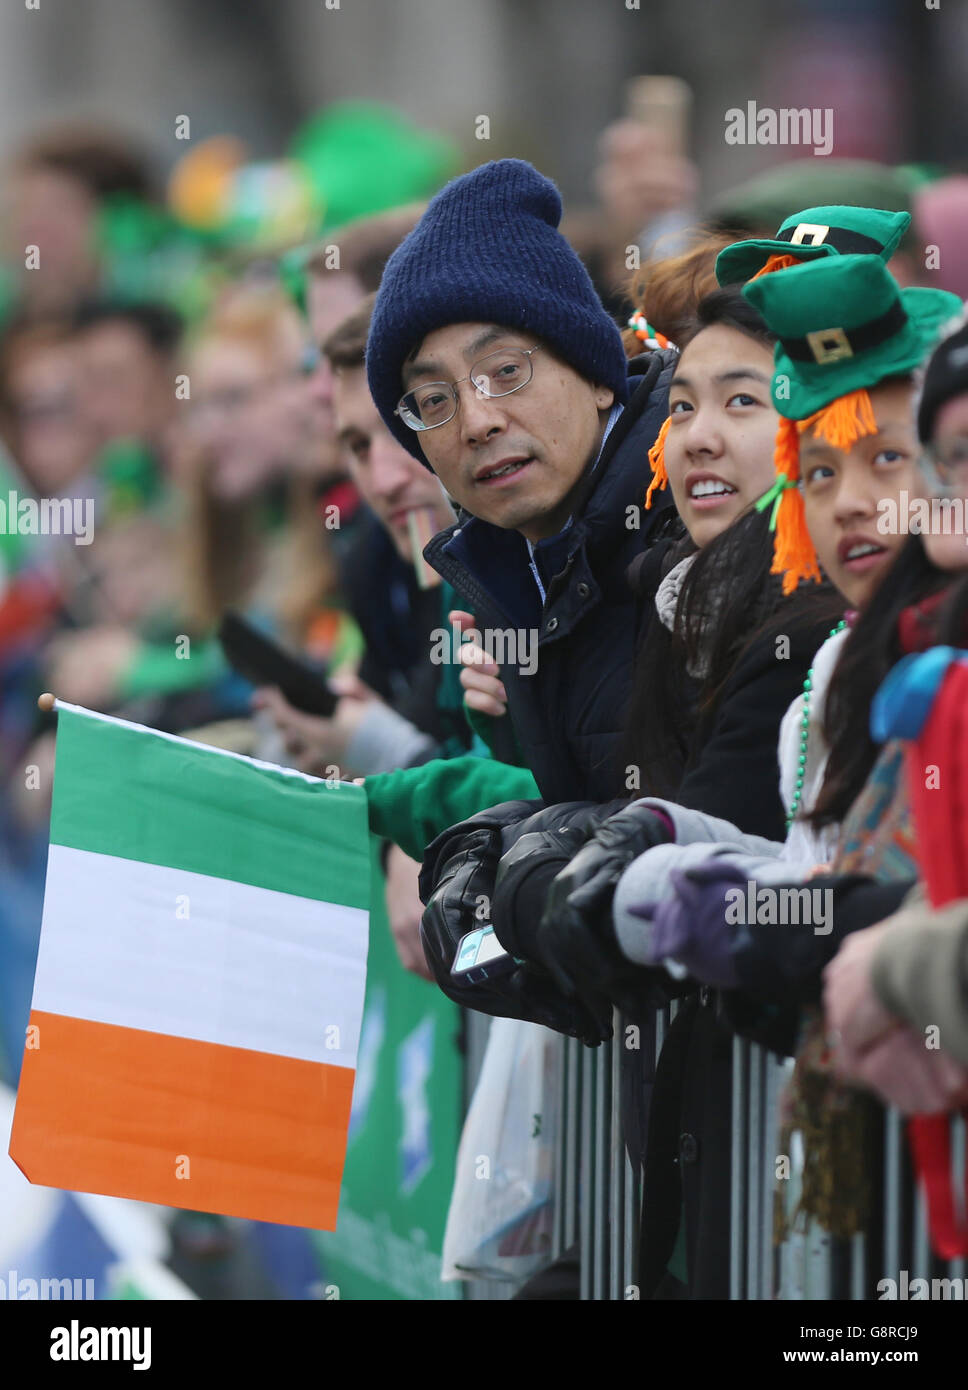 The crowd waits for the start of the St Patrick's Day parade on the streets of Dublin. Stock Photo